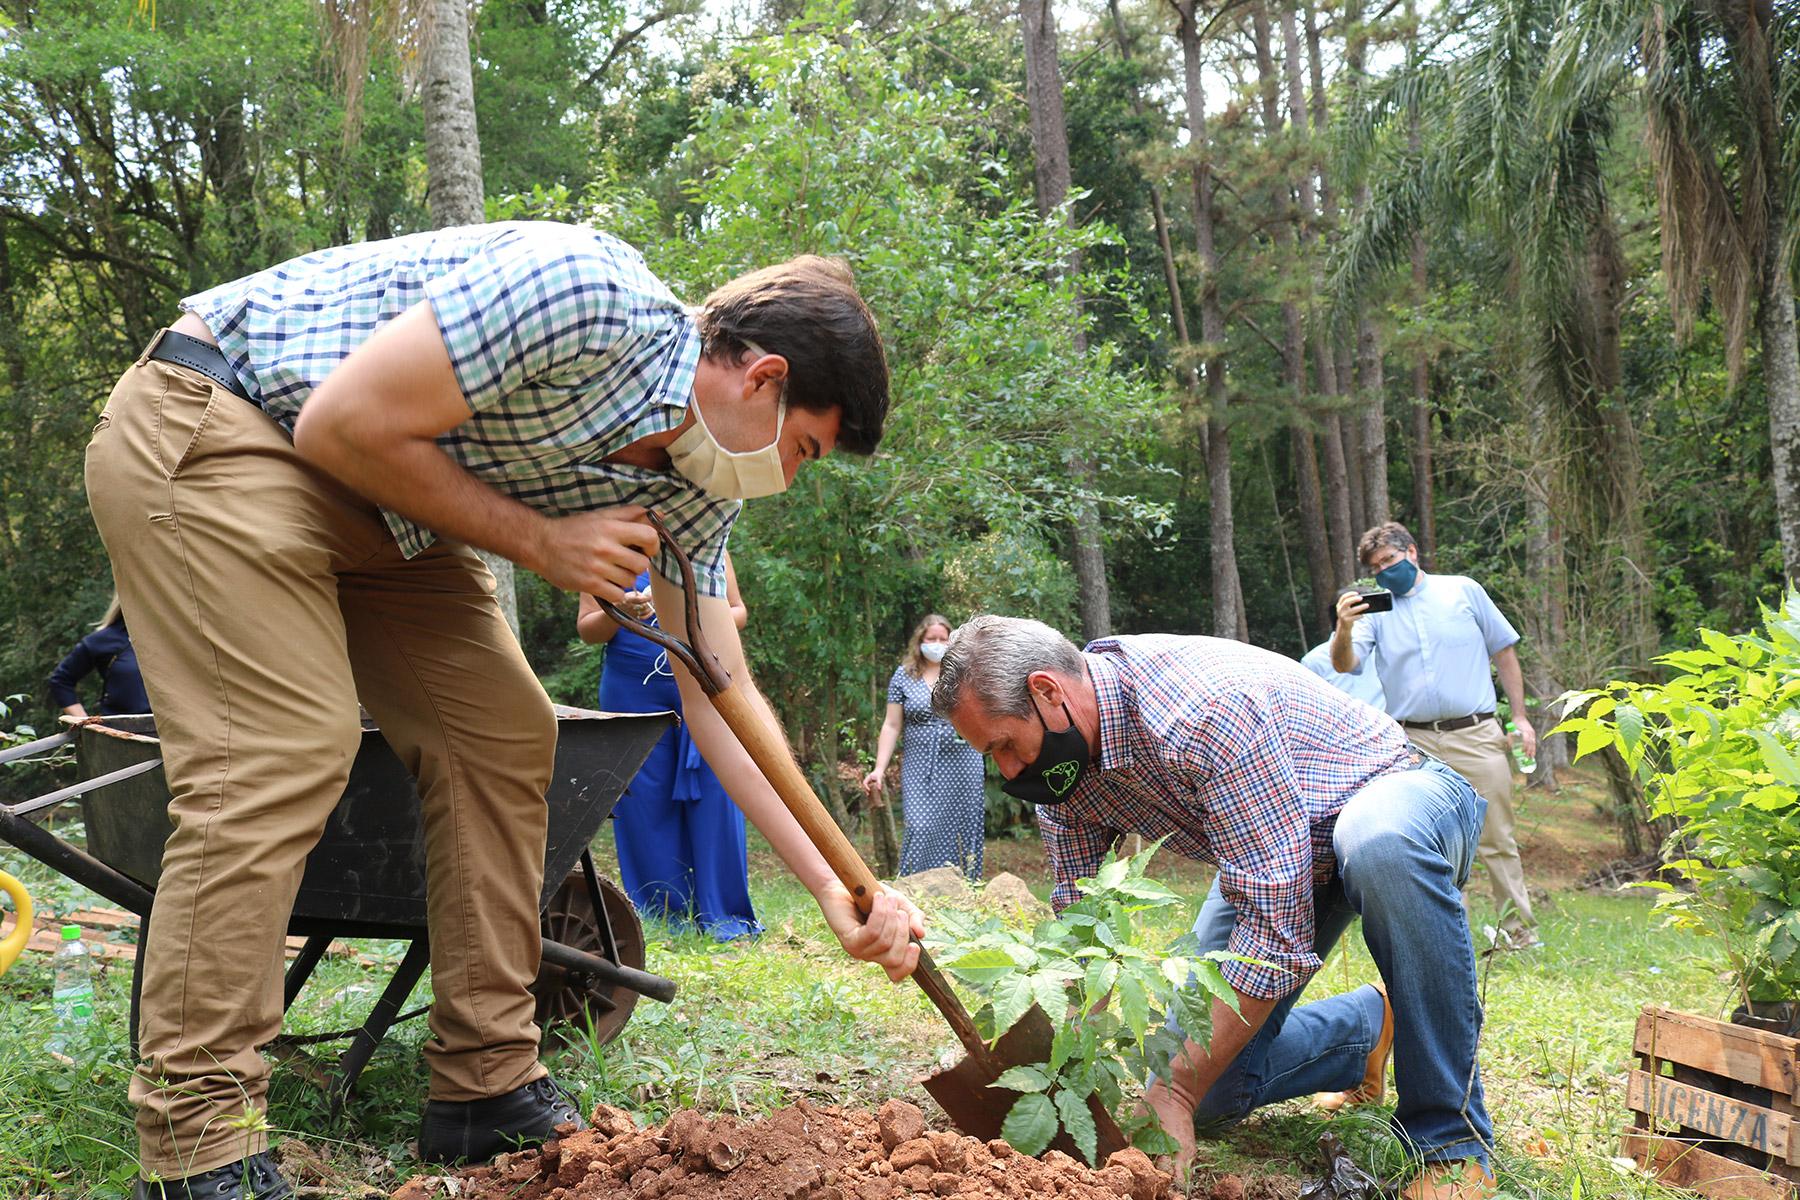 Coordinator of Crece Selva Misionera, Romero Dohmann plants a tree at the IERP Congregation San Juan Eldorado during the launch of a diaconal mission to reforest the region with 180 thousand trees. Photo: Prensa Barreto/IERP